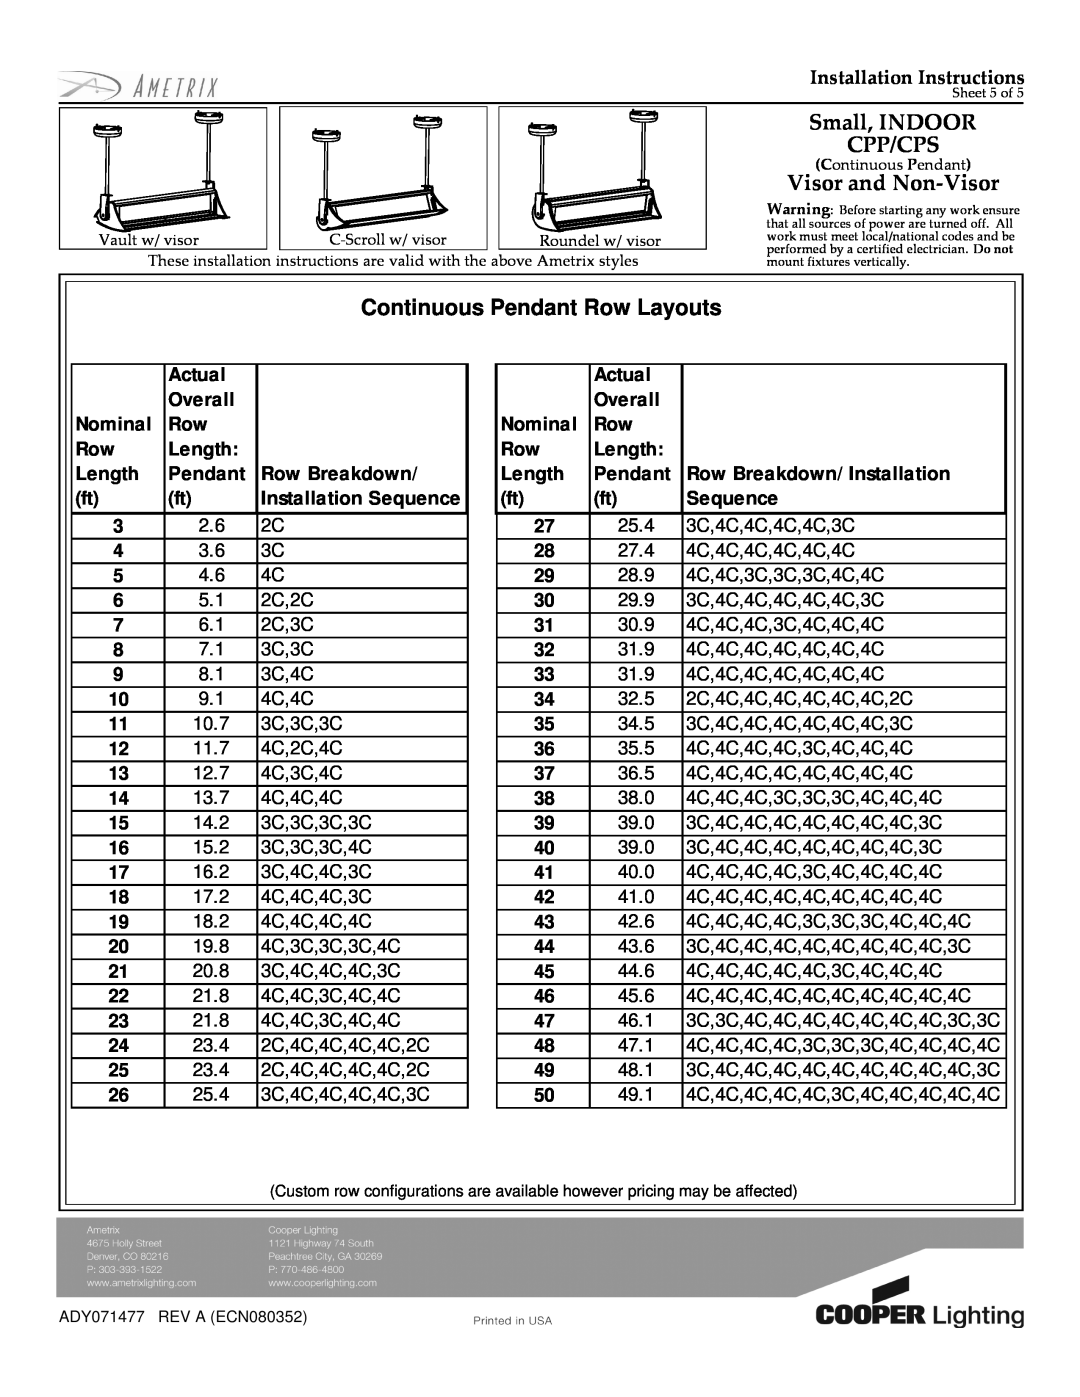 Cooper Lighting Continuous Pendant Row Layouts, Small, INDOOR CPP/CPS, Visor and Non-Visor, Installation Instructions 